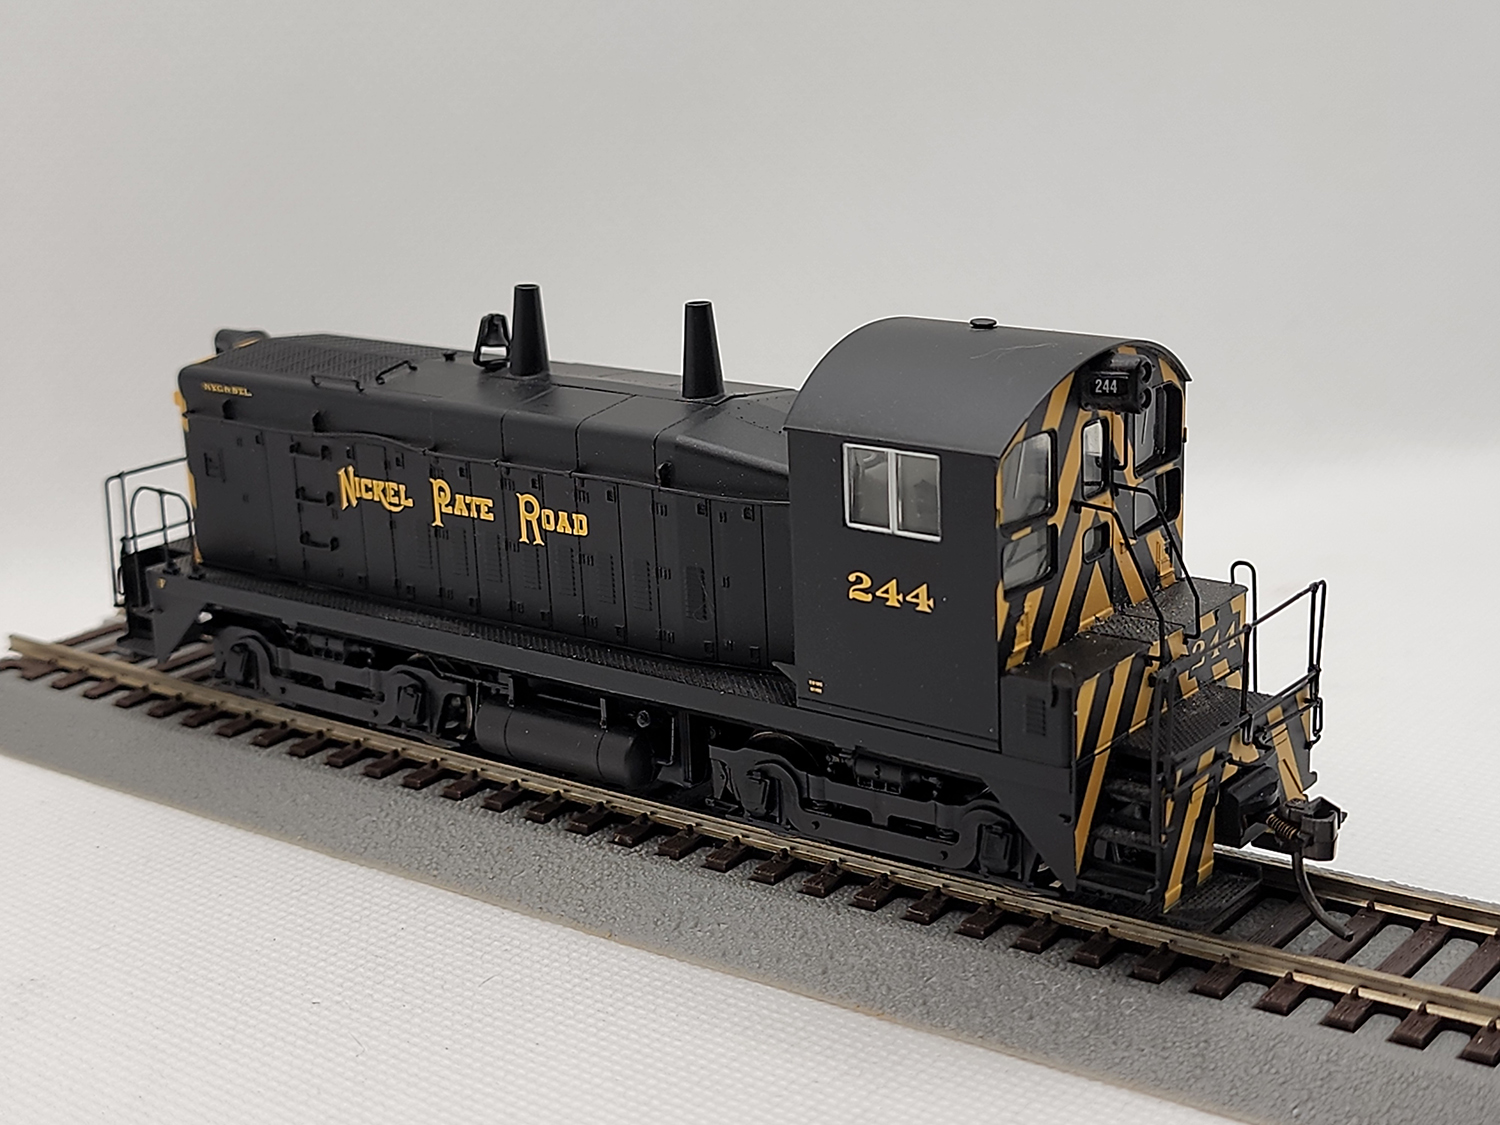 4th view of the Life-Like Nickel Plate Road SW9 Diesel Locomotive #244 in my HO-scale Collection